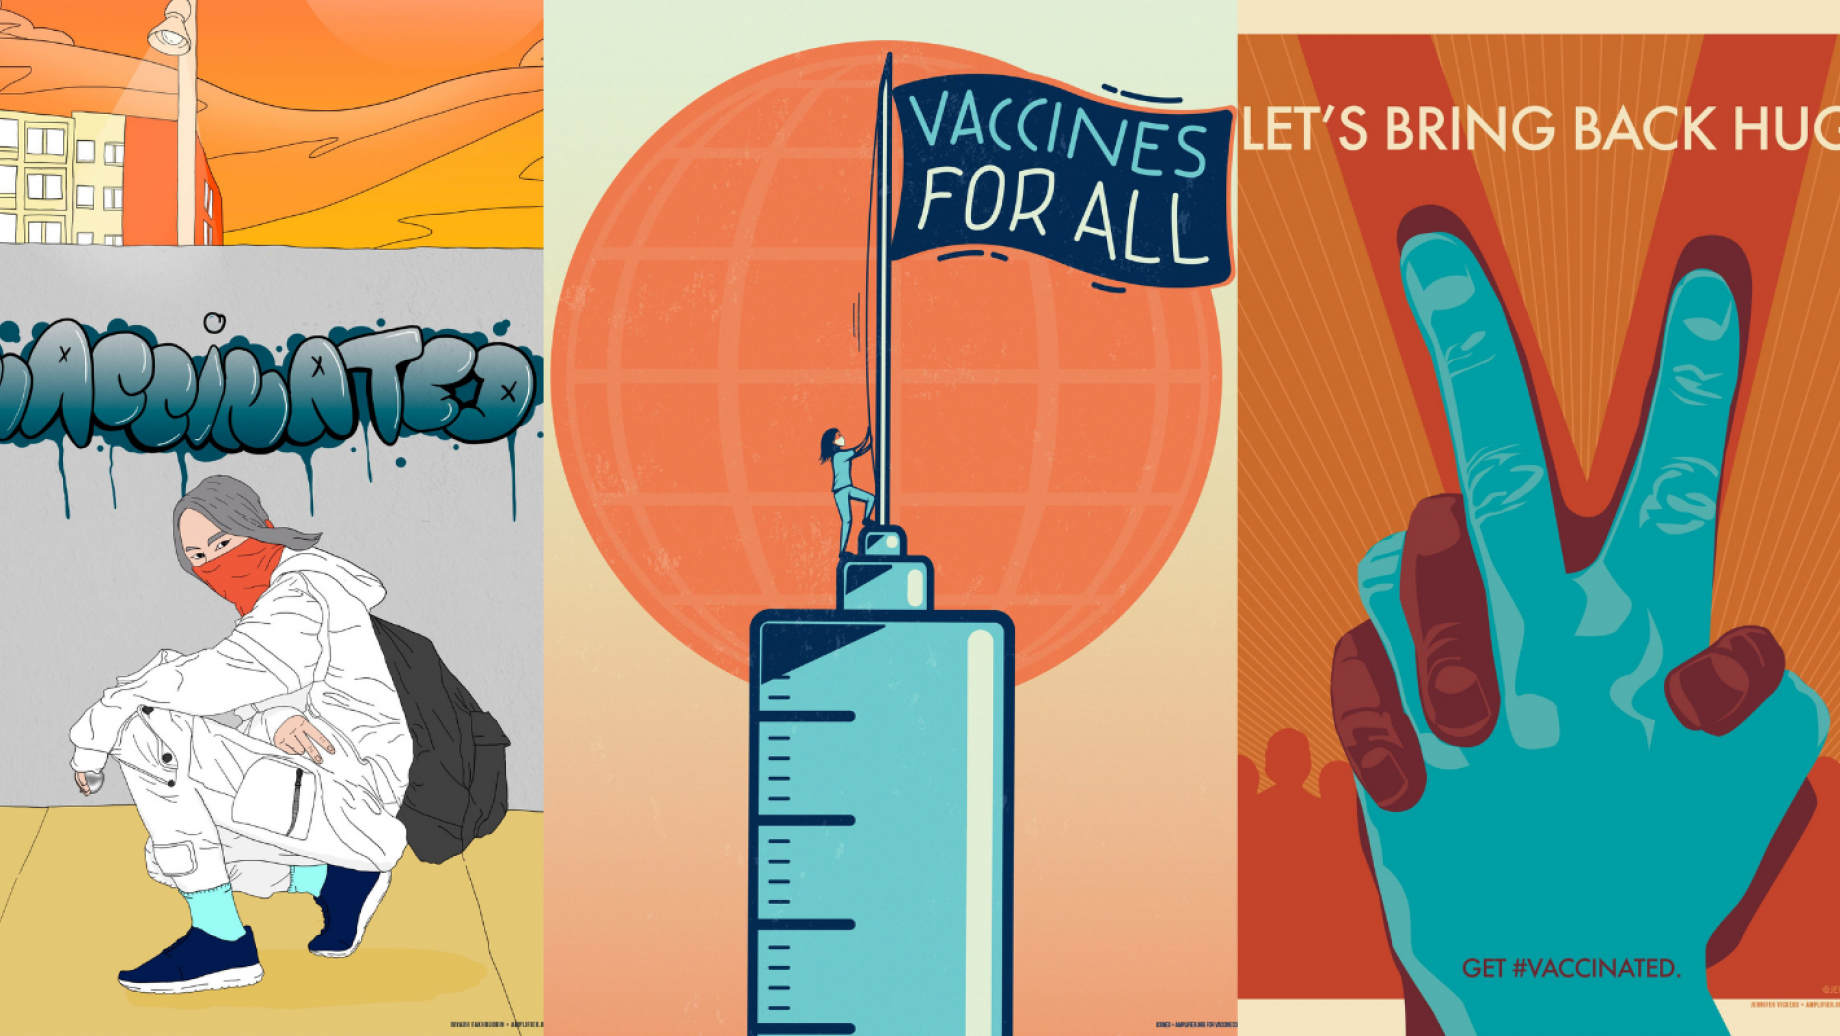 1. Vaccinated by Riyadh Fakhruddi. | 2. Vaccines For All by Icone. | 3. Bring Back Hugs by Jennifer Vicke